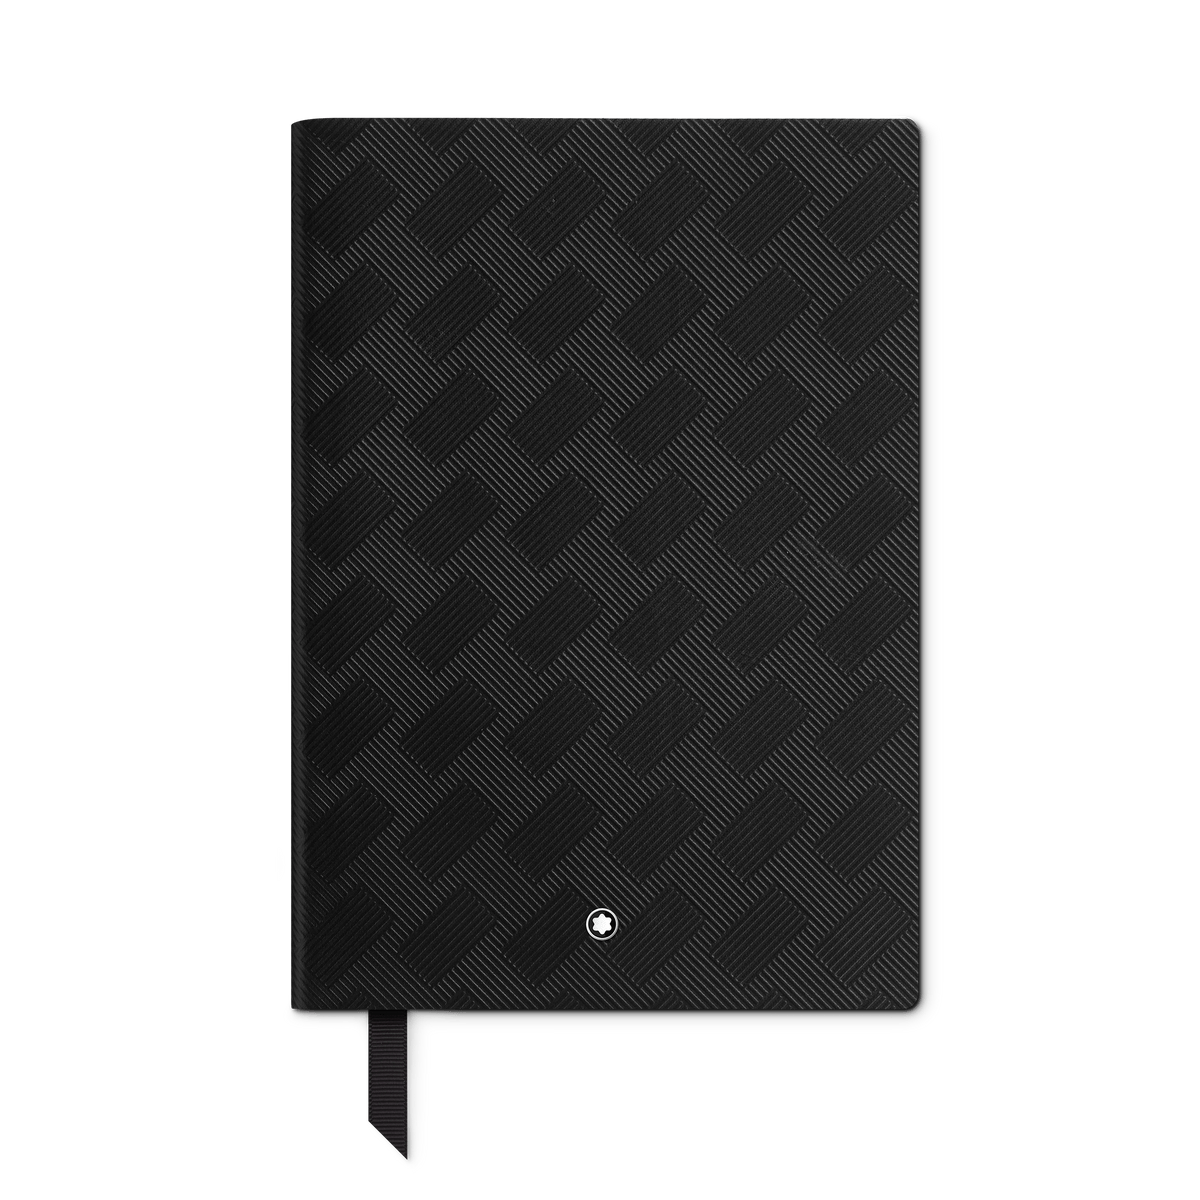 Notebook #146 small, Montblanc Extreme 3.0 collection, black, lined